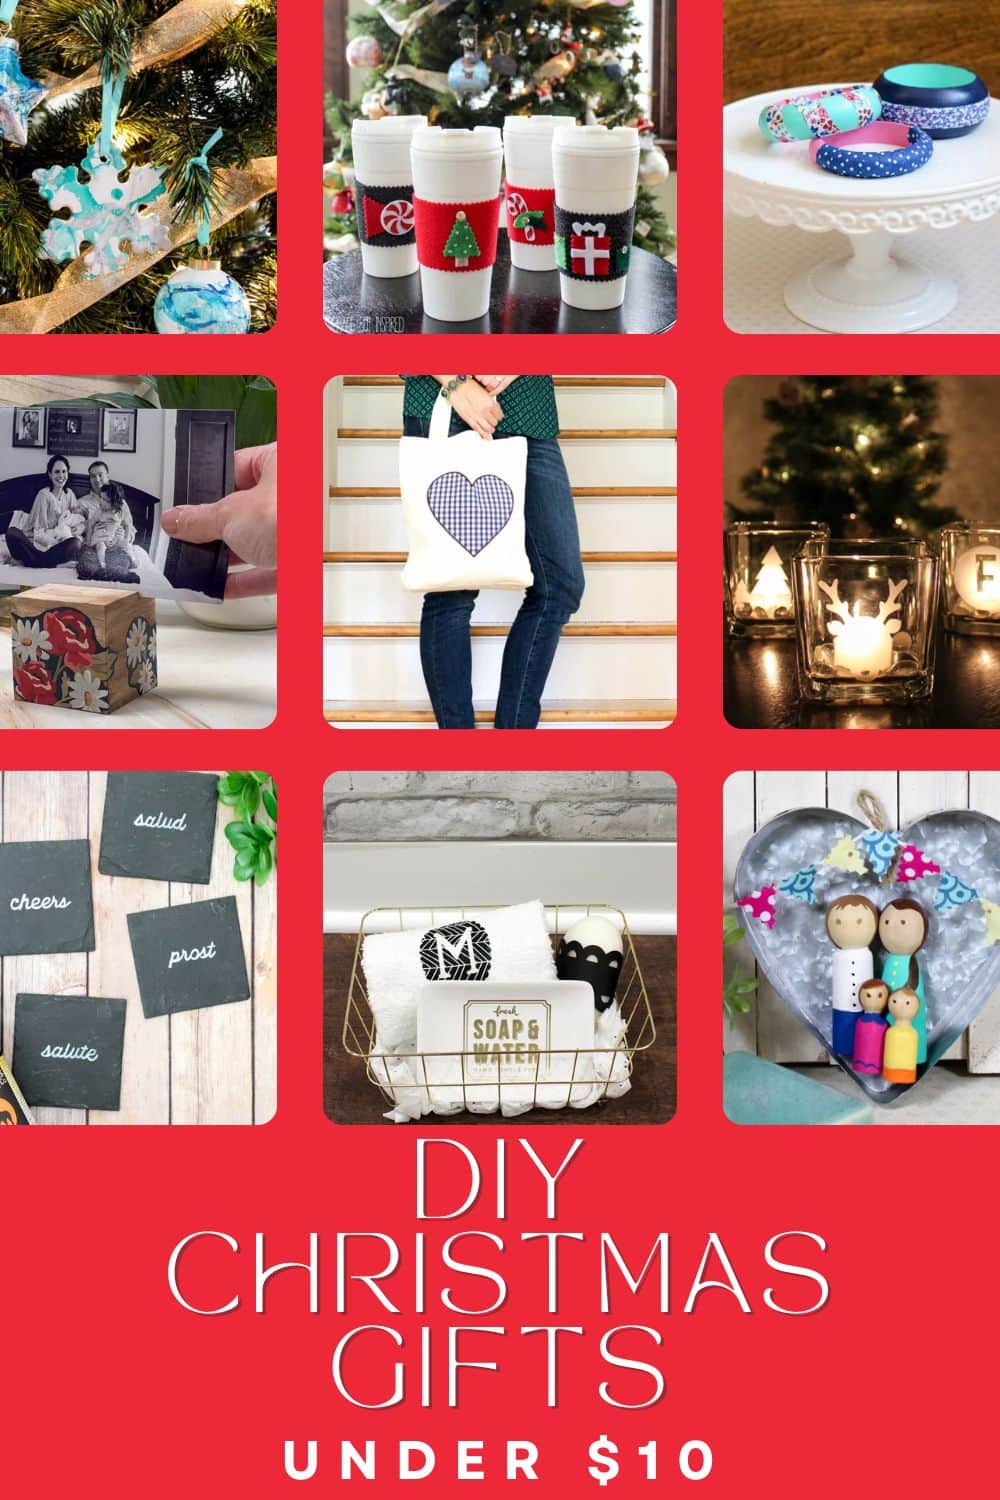 10 Presents for Christmas Under $10 To Make  Diy christmas gifts cheap,  Cheap christmas gifts, Homemade christmas gifts